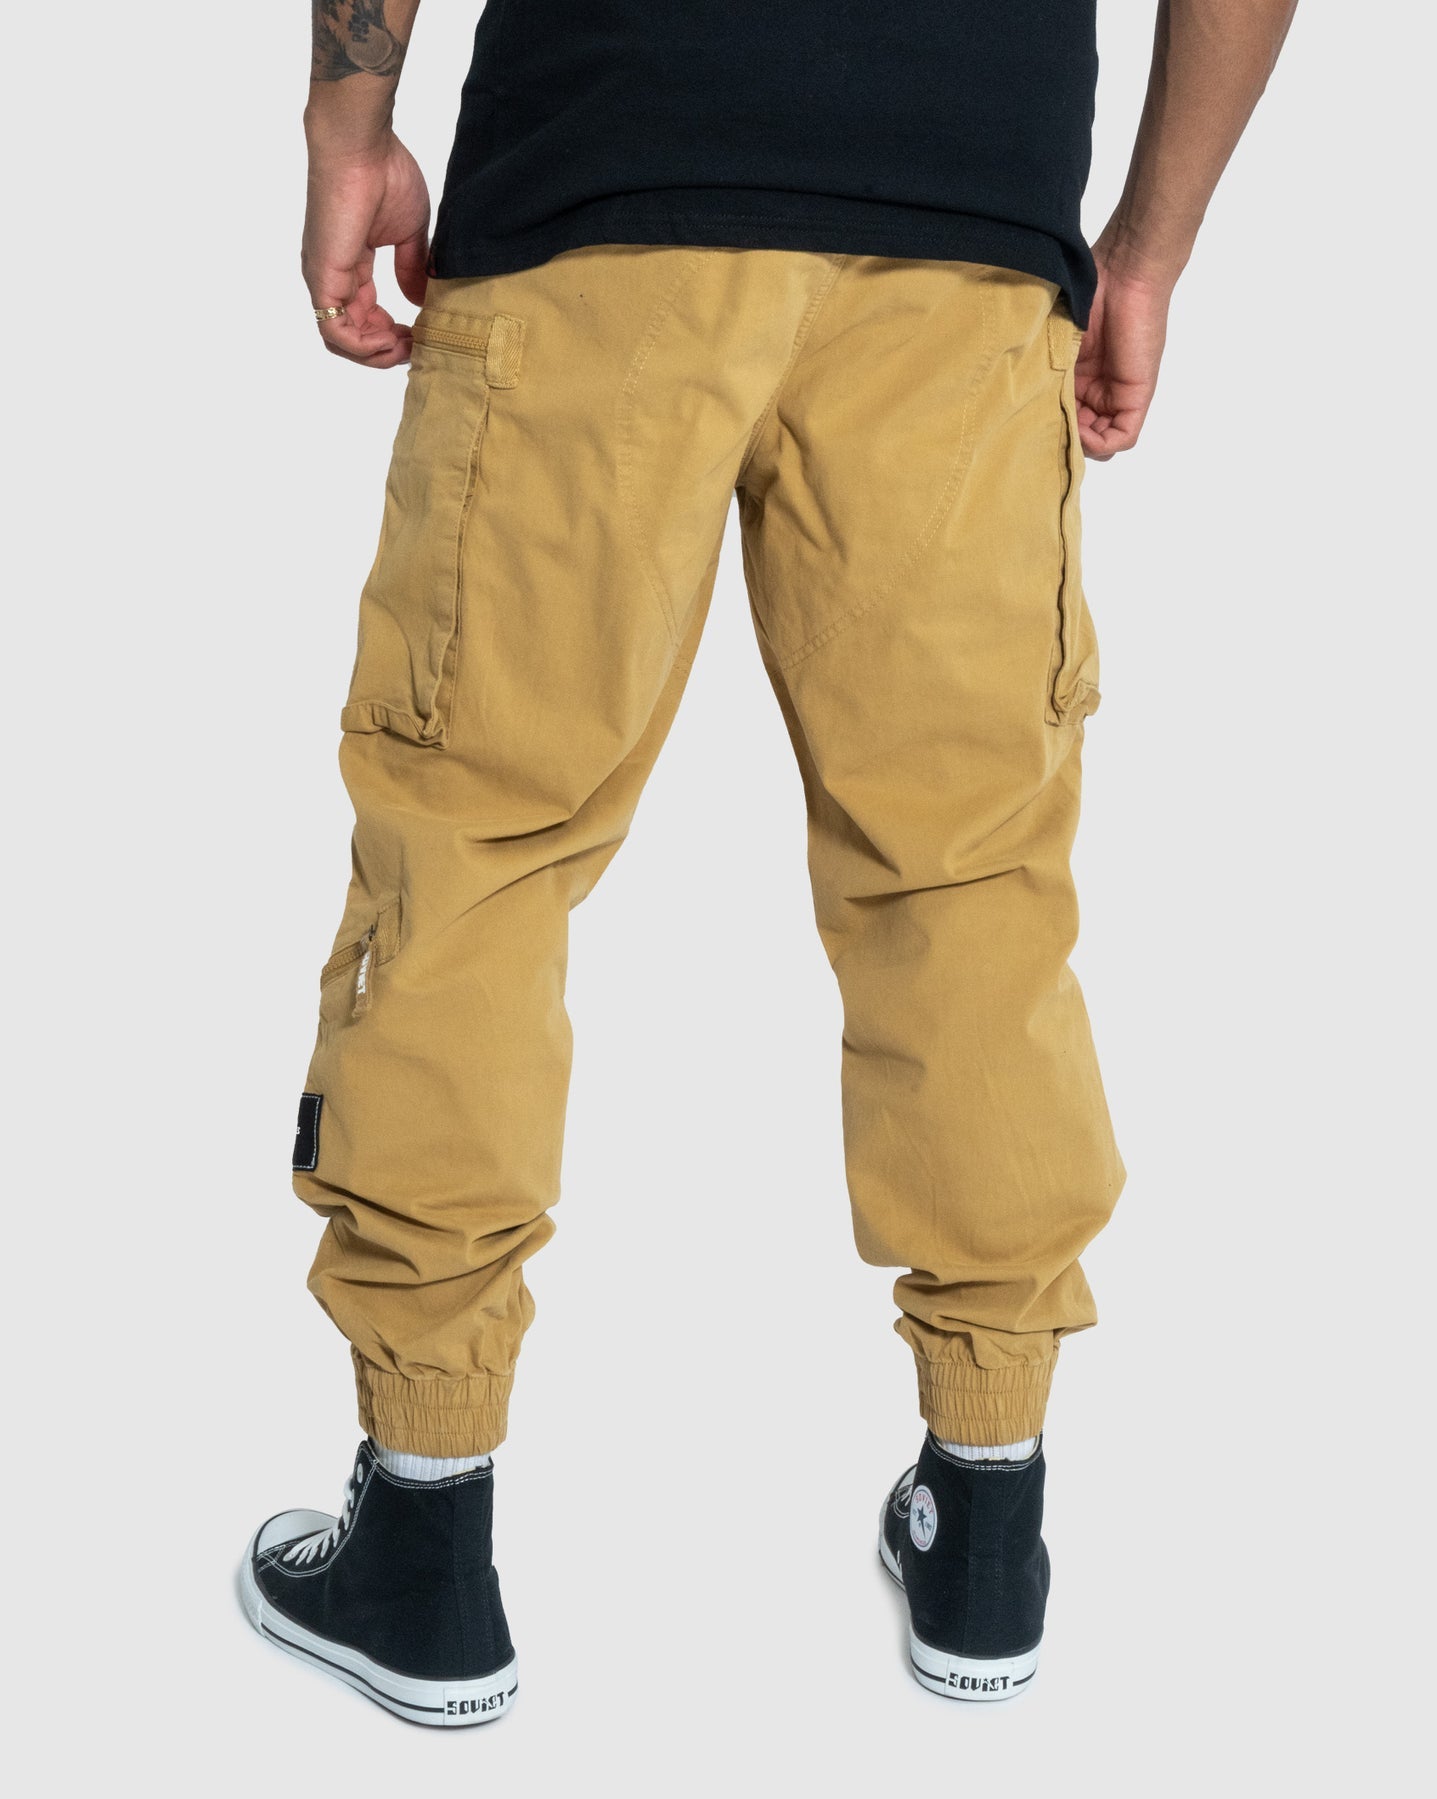 Green cargo pants, SMUDJ, Made in South Africa